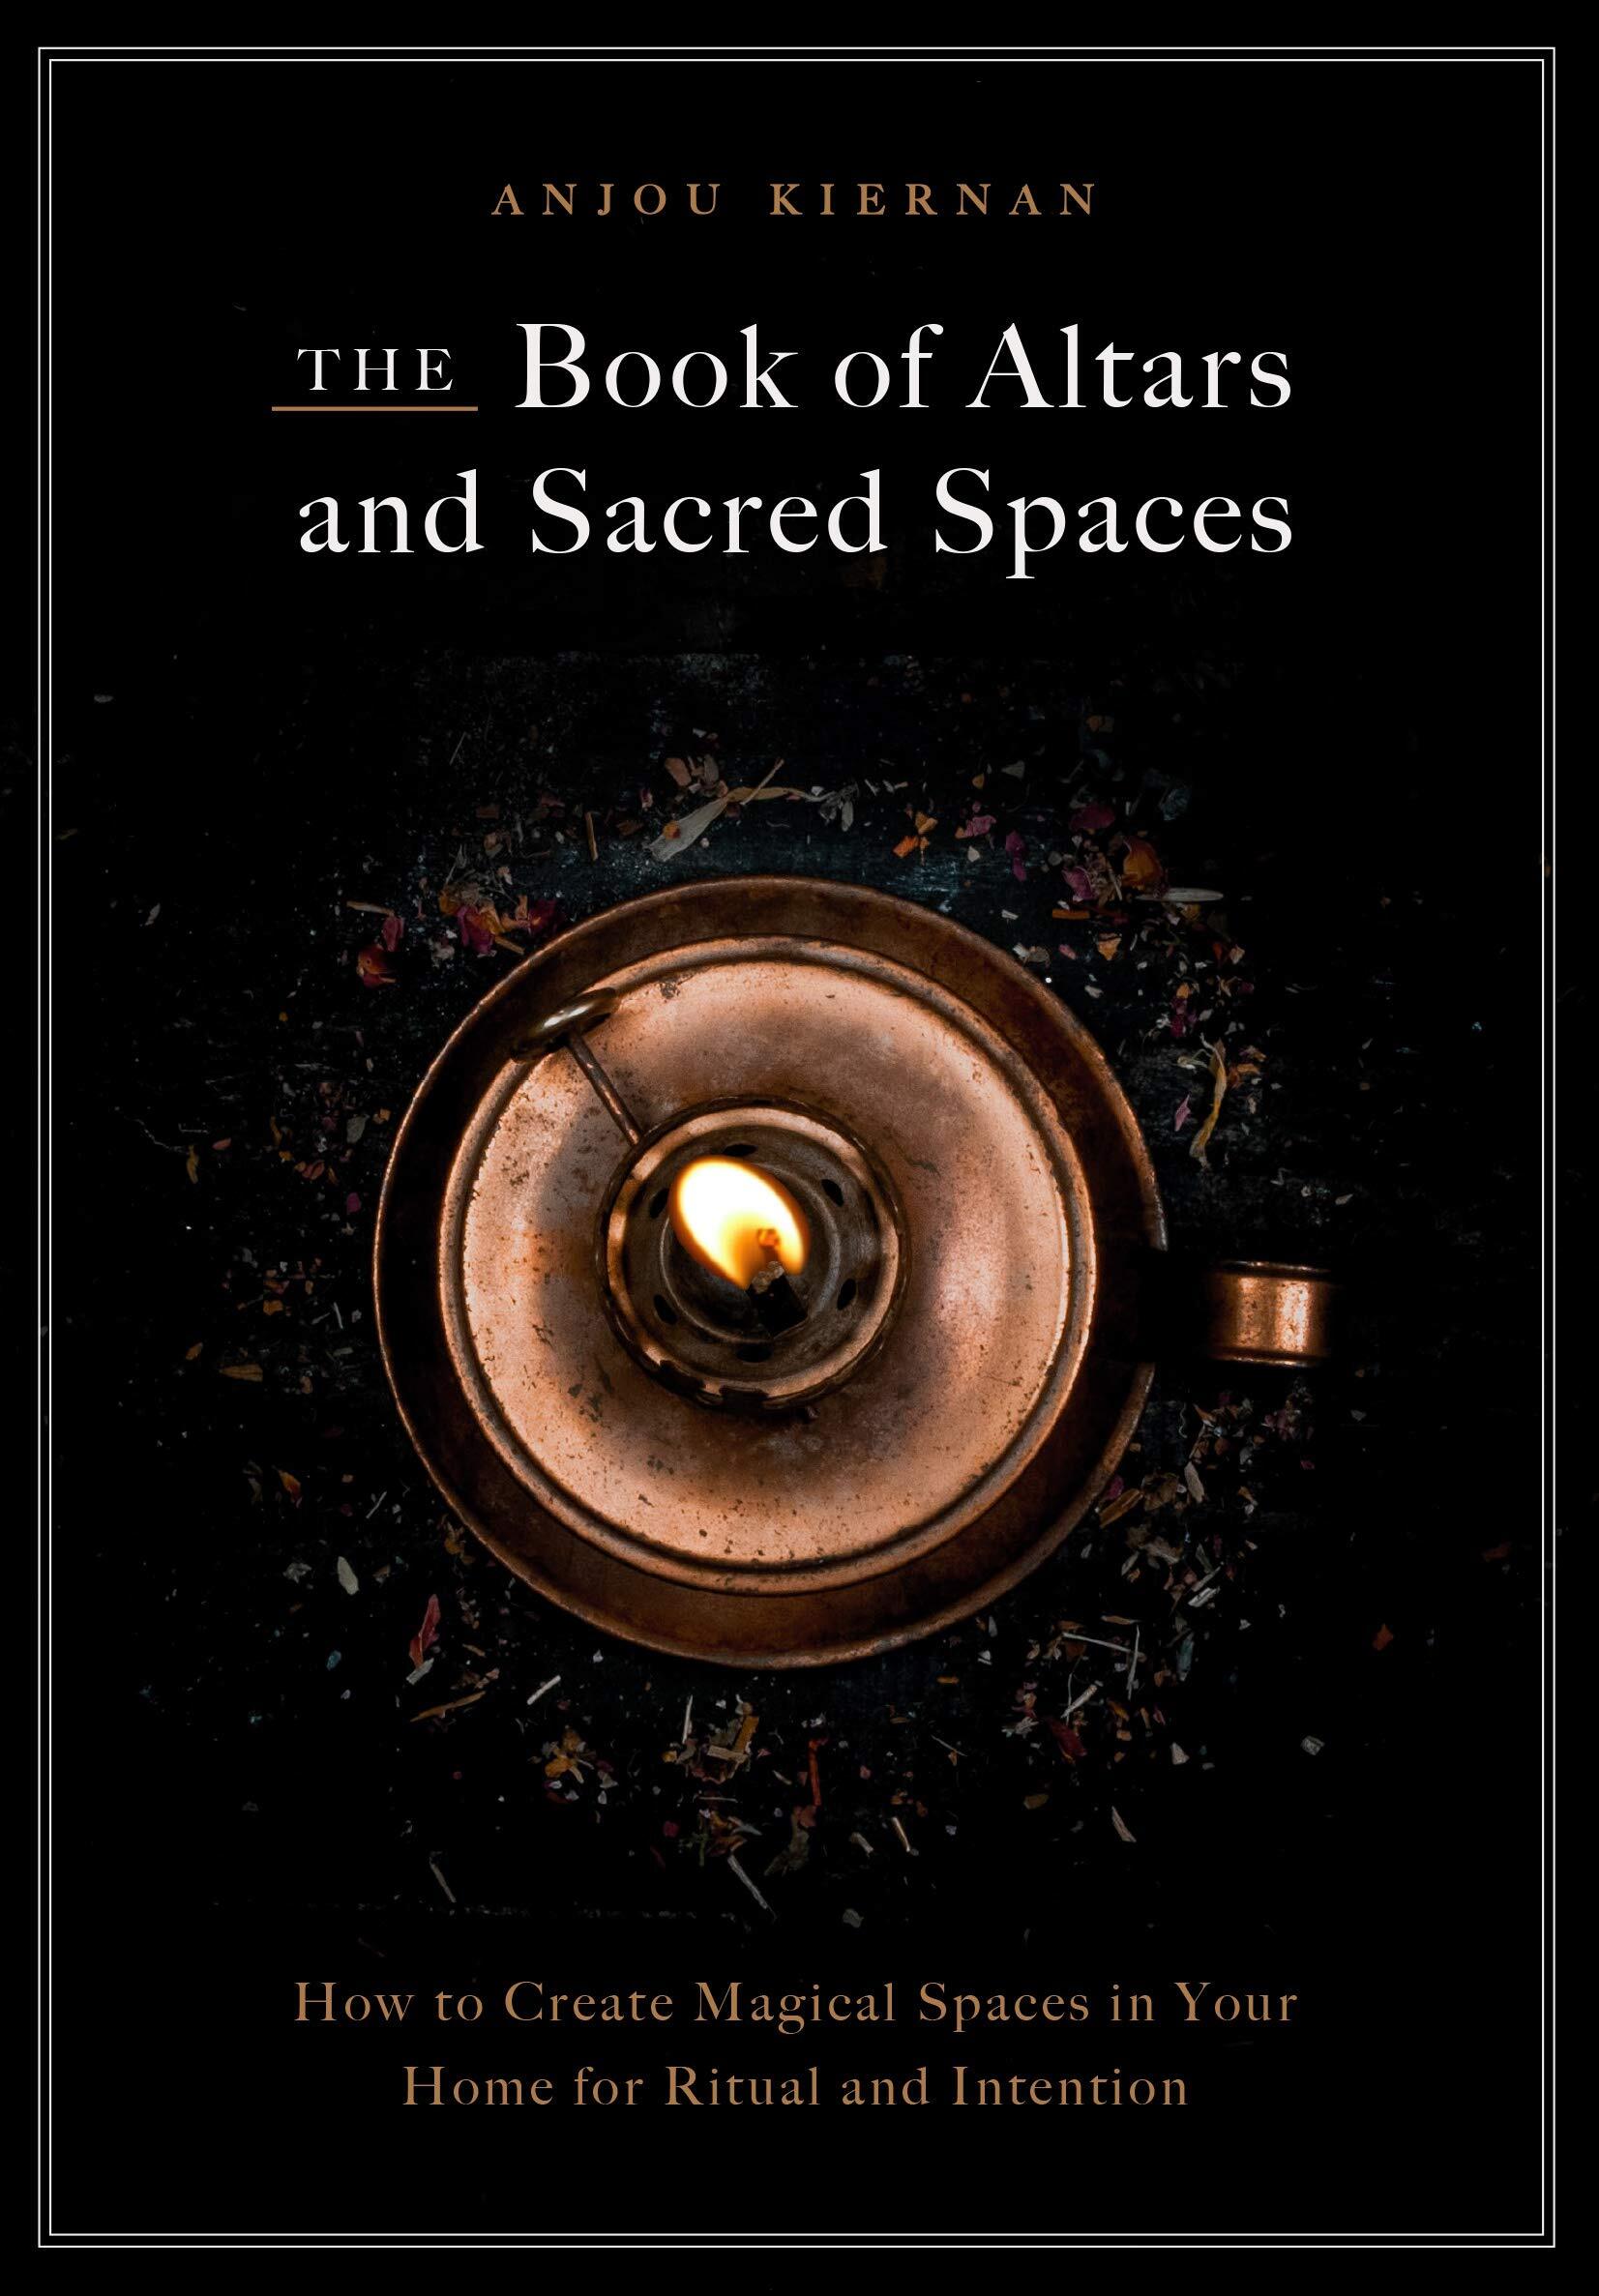 The Book of Altars and Sacred Spaces: How to Create Magical Spaces in Your Home for Ritual and Intention (Hardcover)